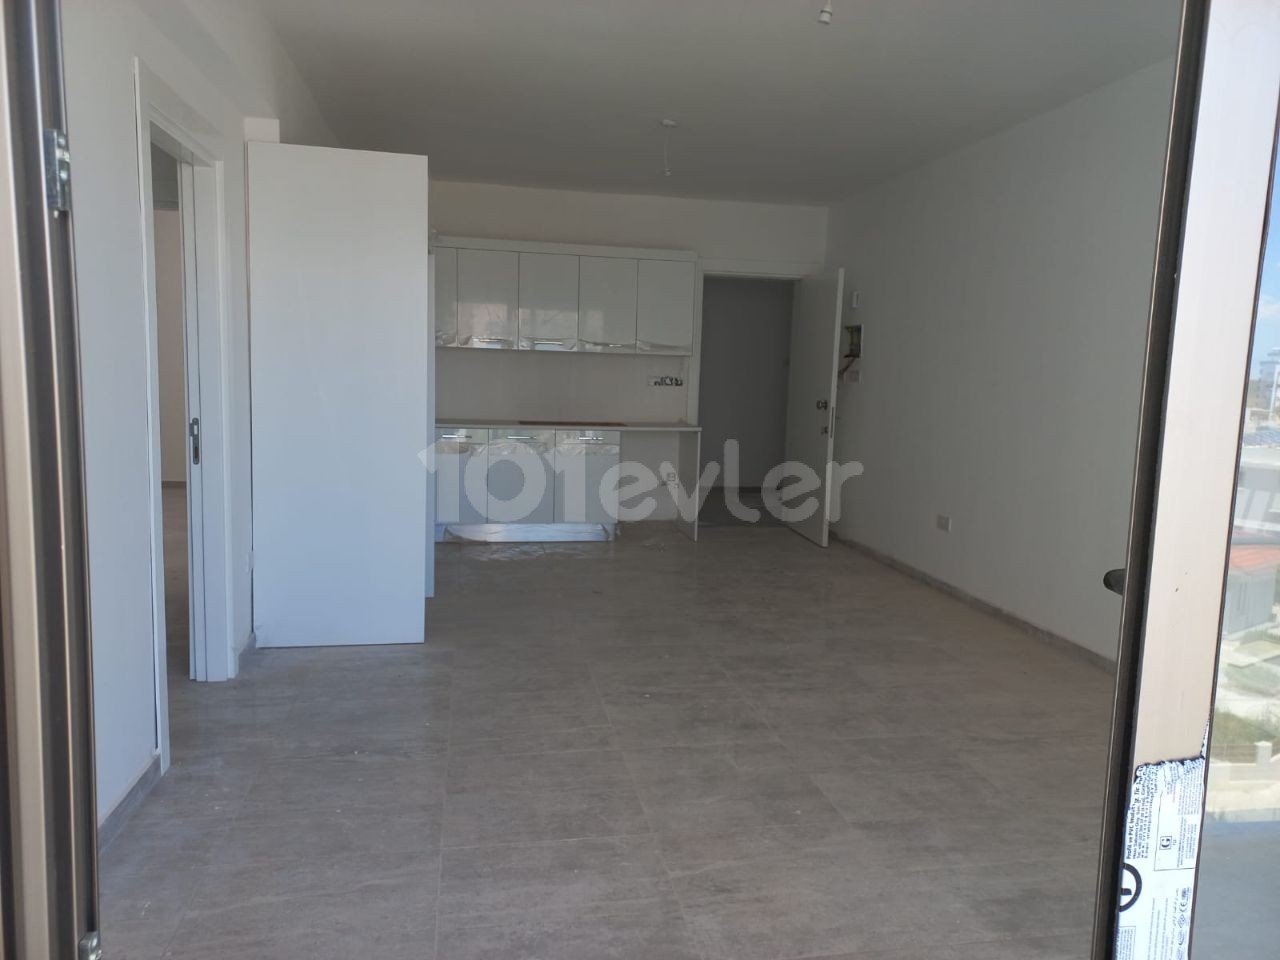 2+1 apartment HABIBE CETIN 05338547005 in the Canakkale district of Famagusta ** 